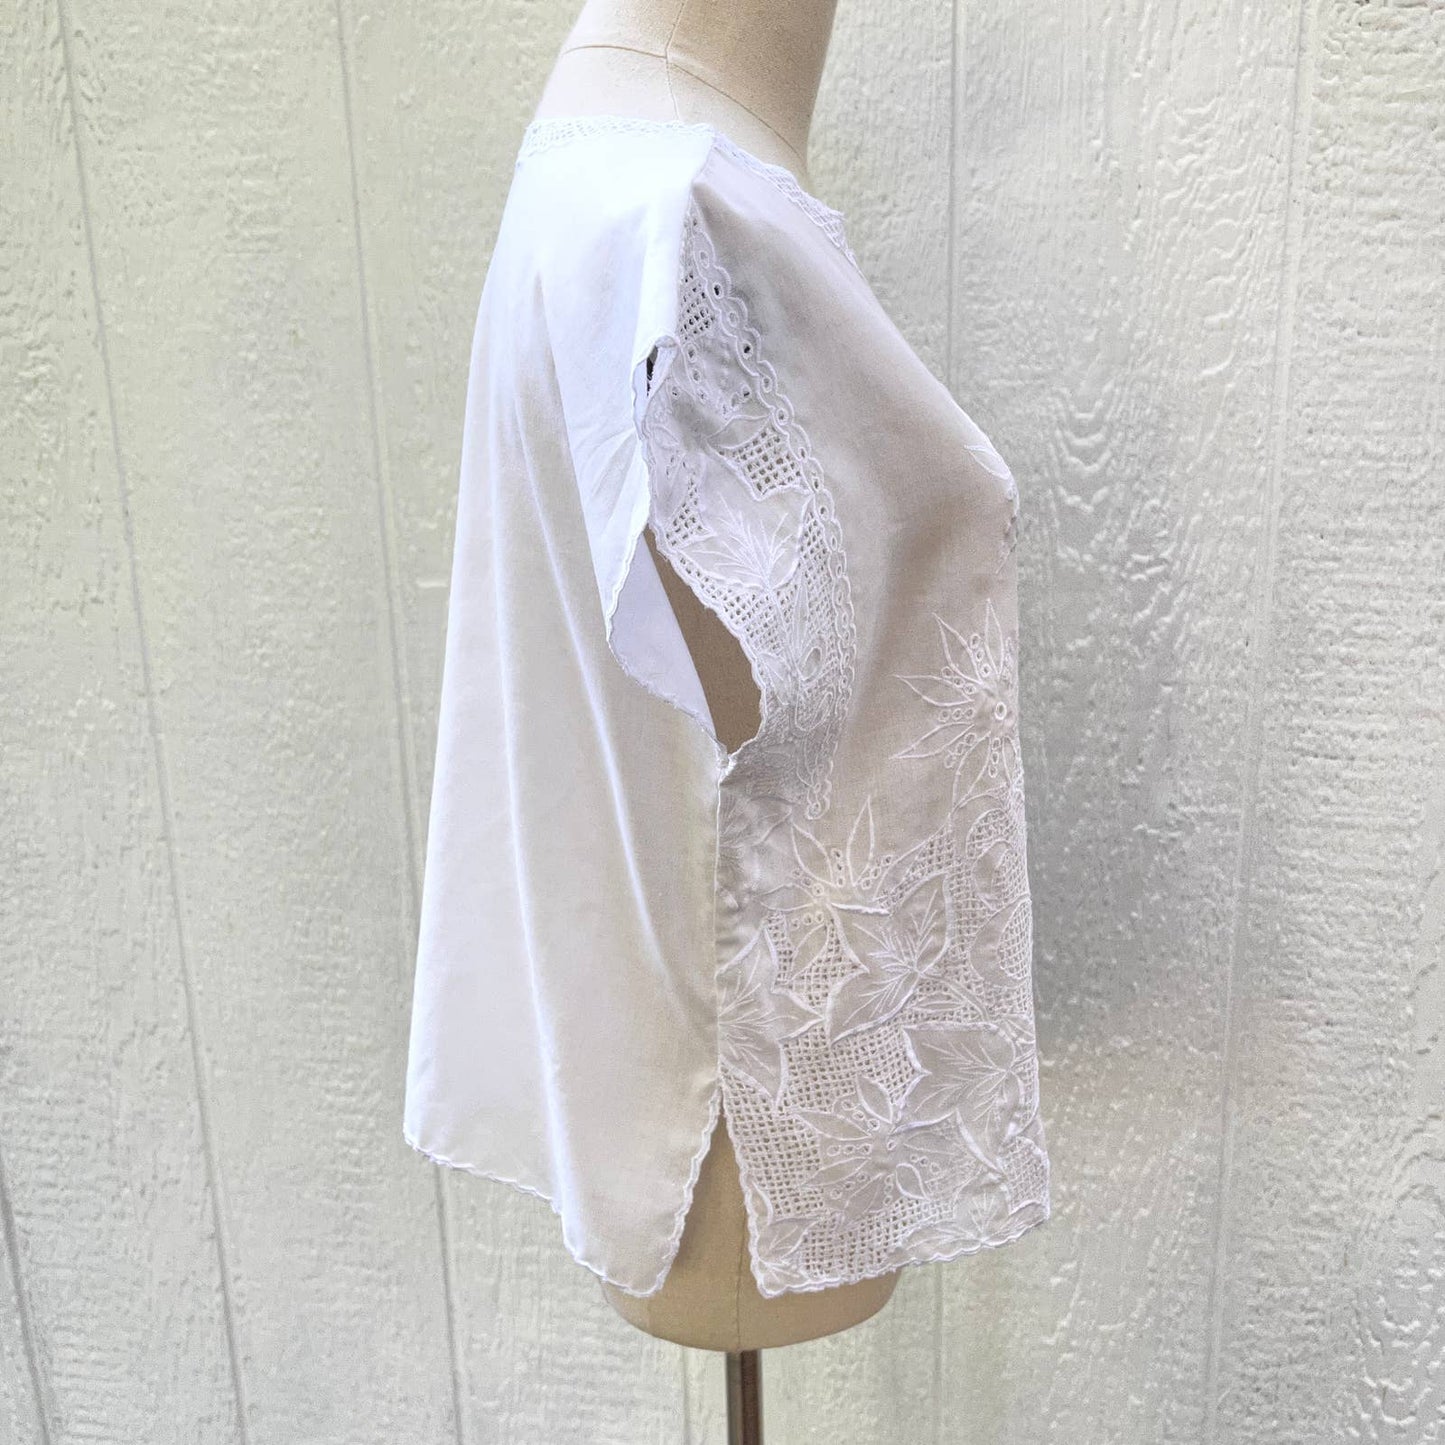 Vintage Handmade White Cotton Blouse Sleeveless Top Embroidered Open Stitch S M